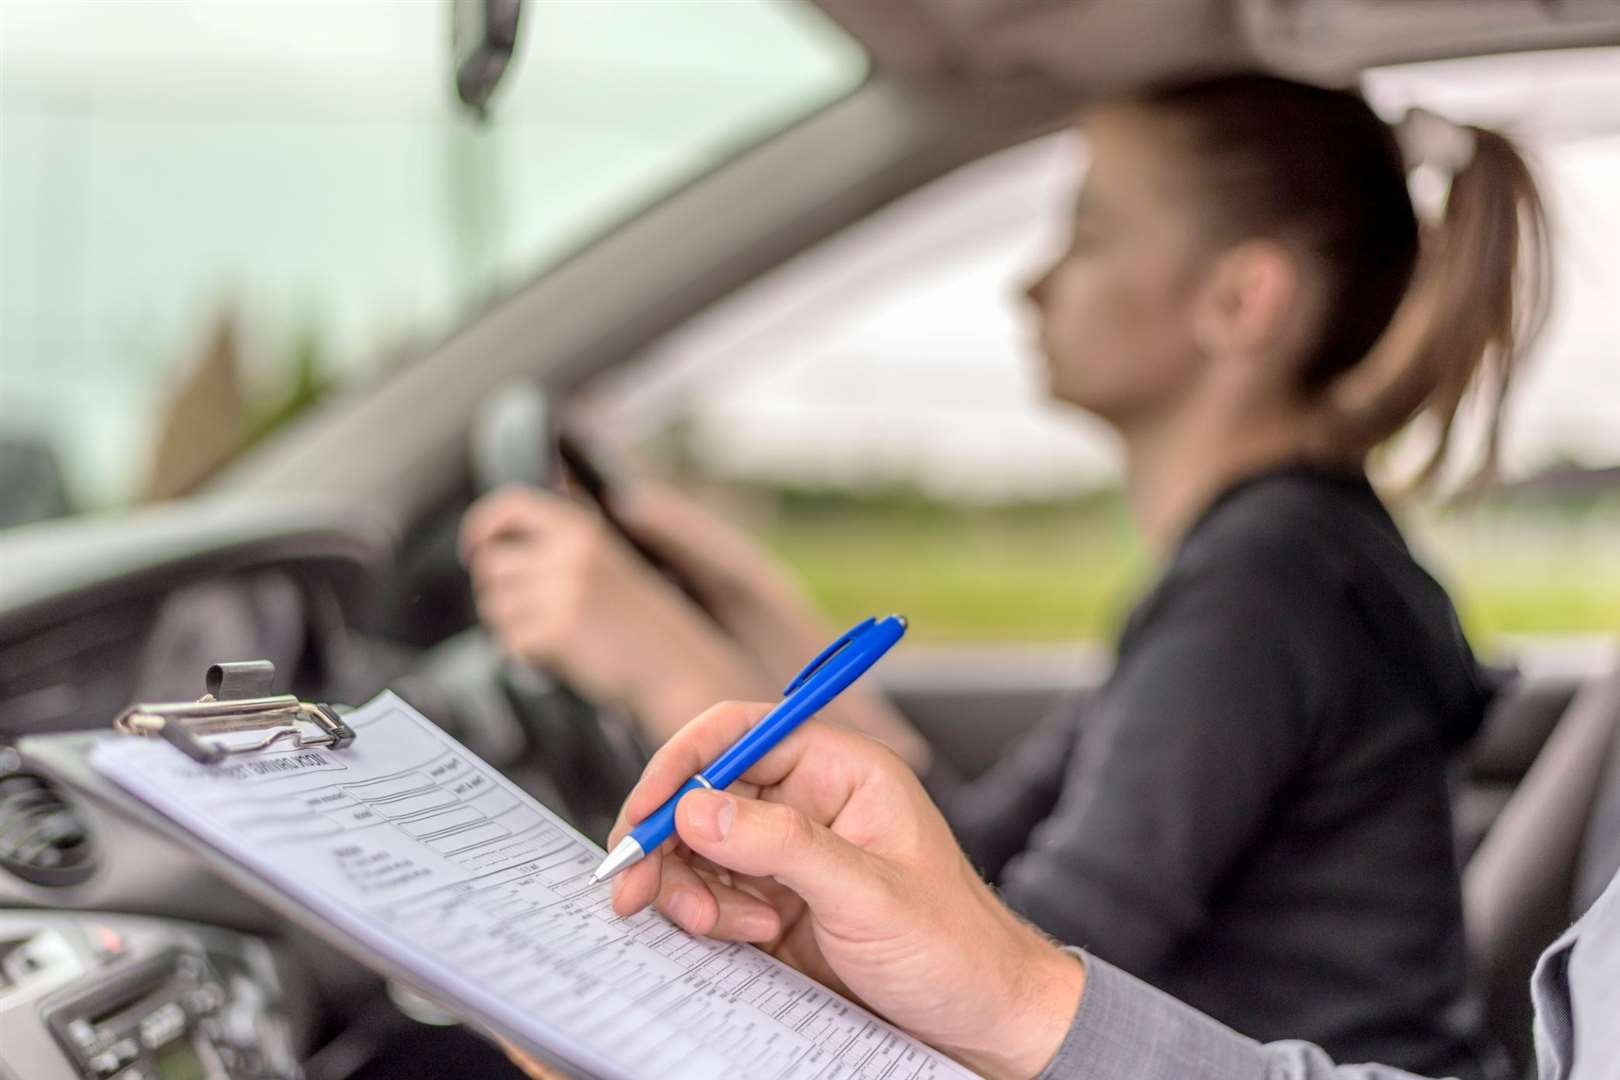 The cost of car insurance has gone up by more than £500 for young drivers. Image: iStock.